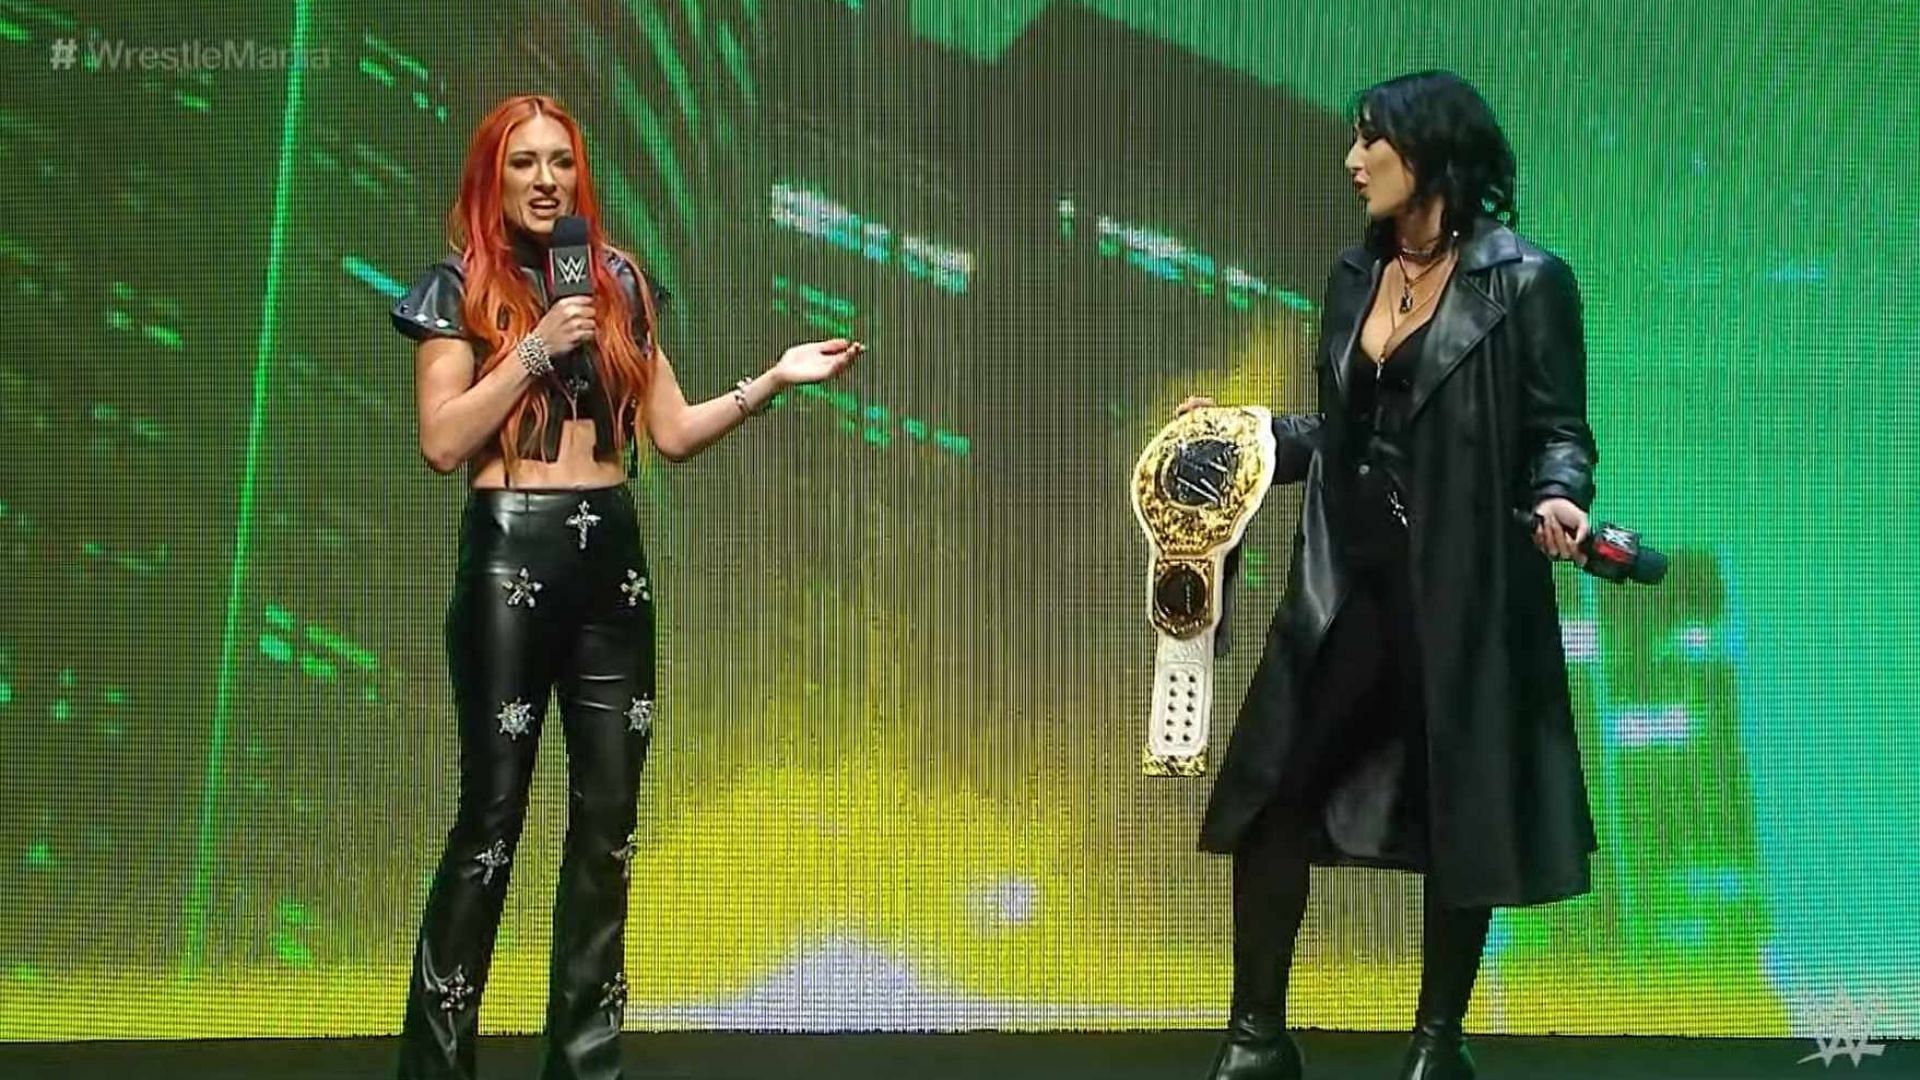 Becky Lynch has her sights on the Women